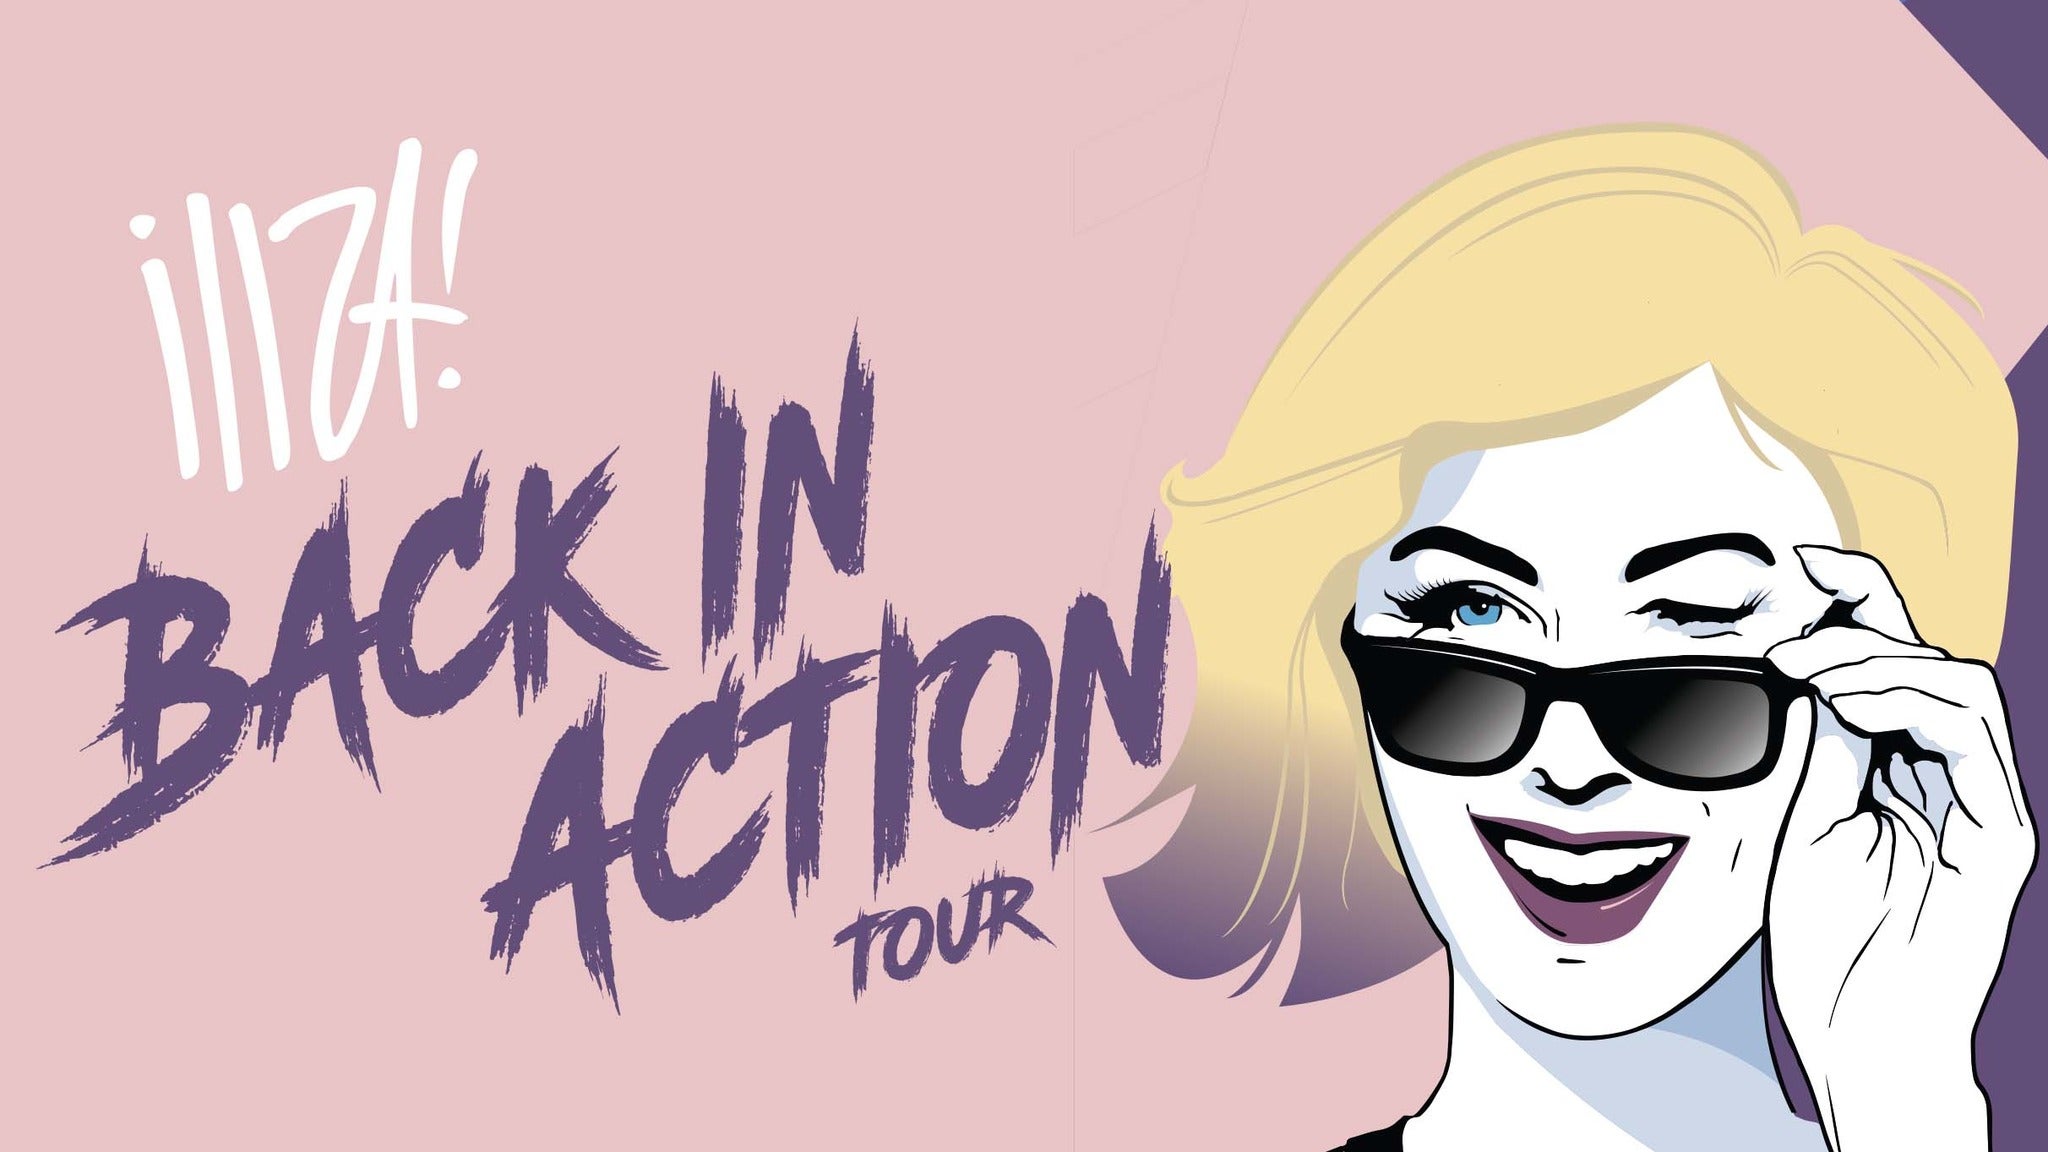 Image used with permission from Ticketmaster | Iliza Shlesinger - Back In Action Tour tickets